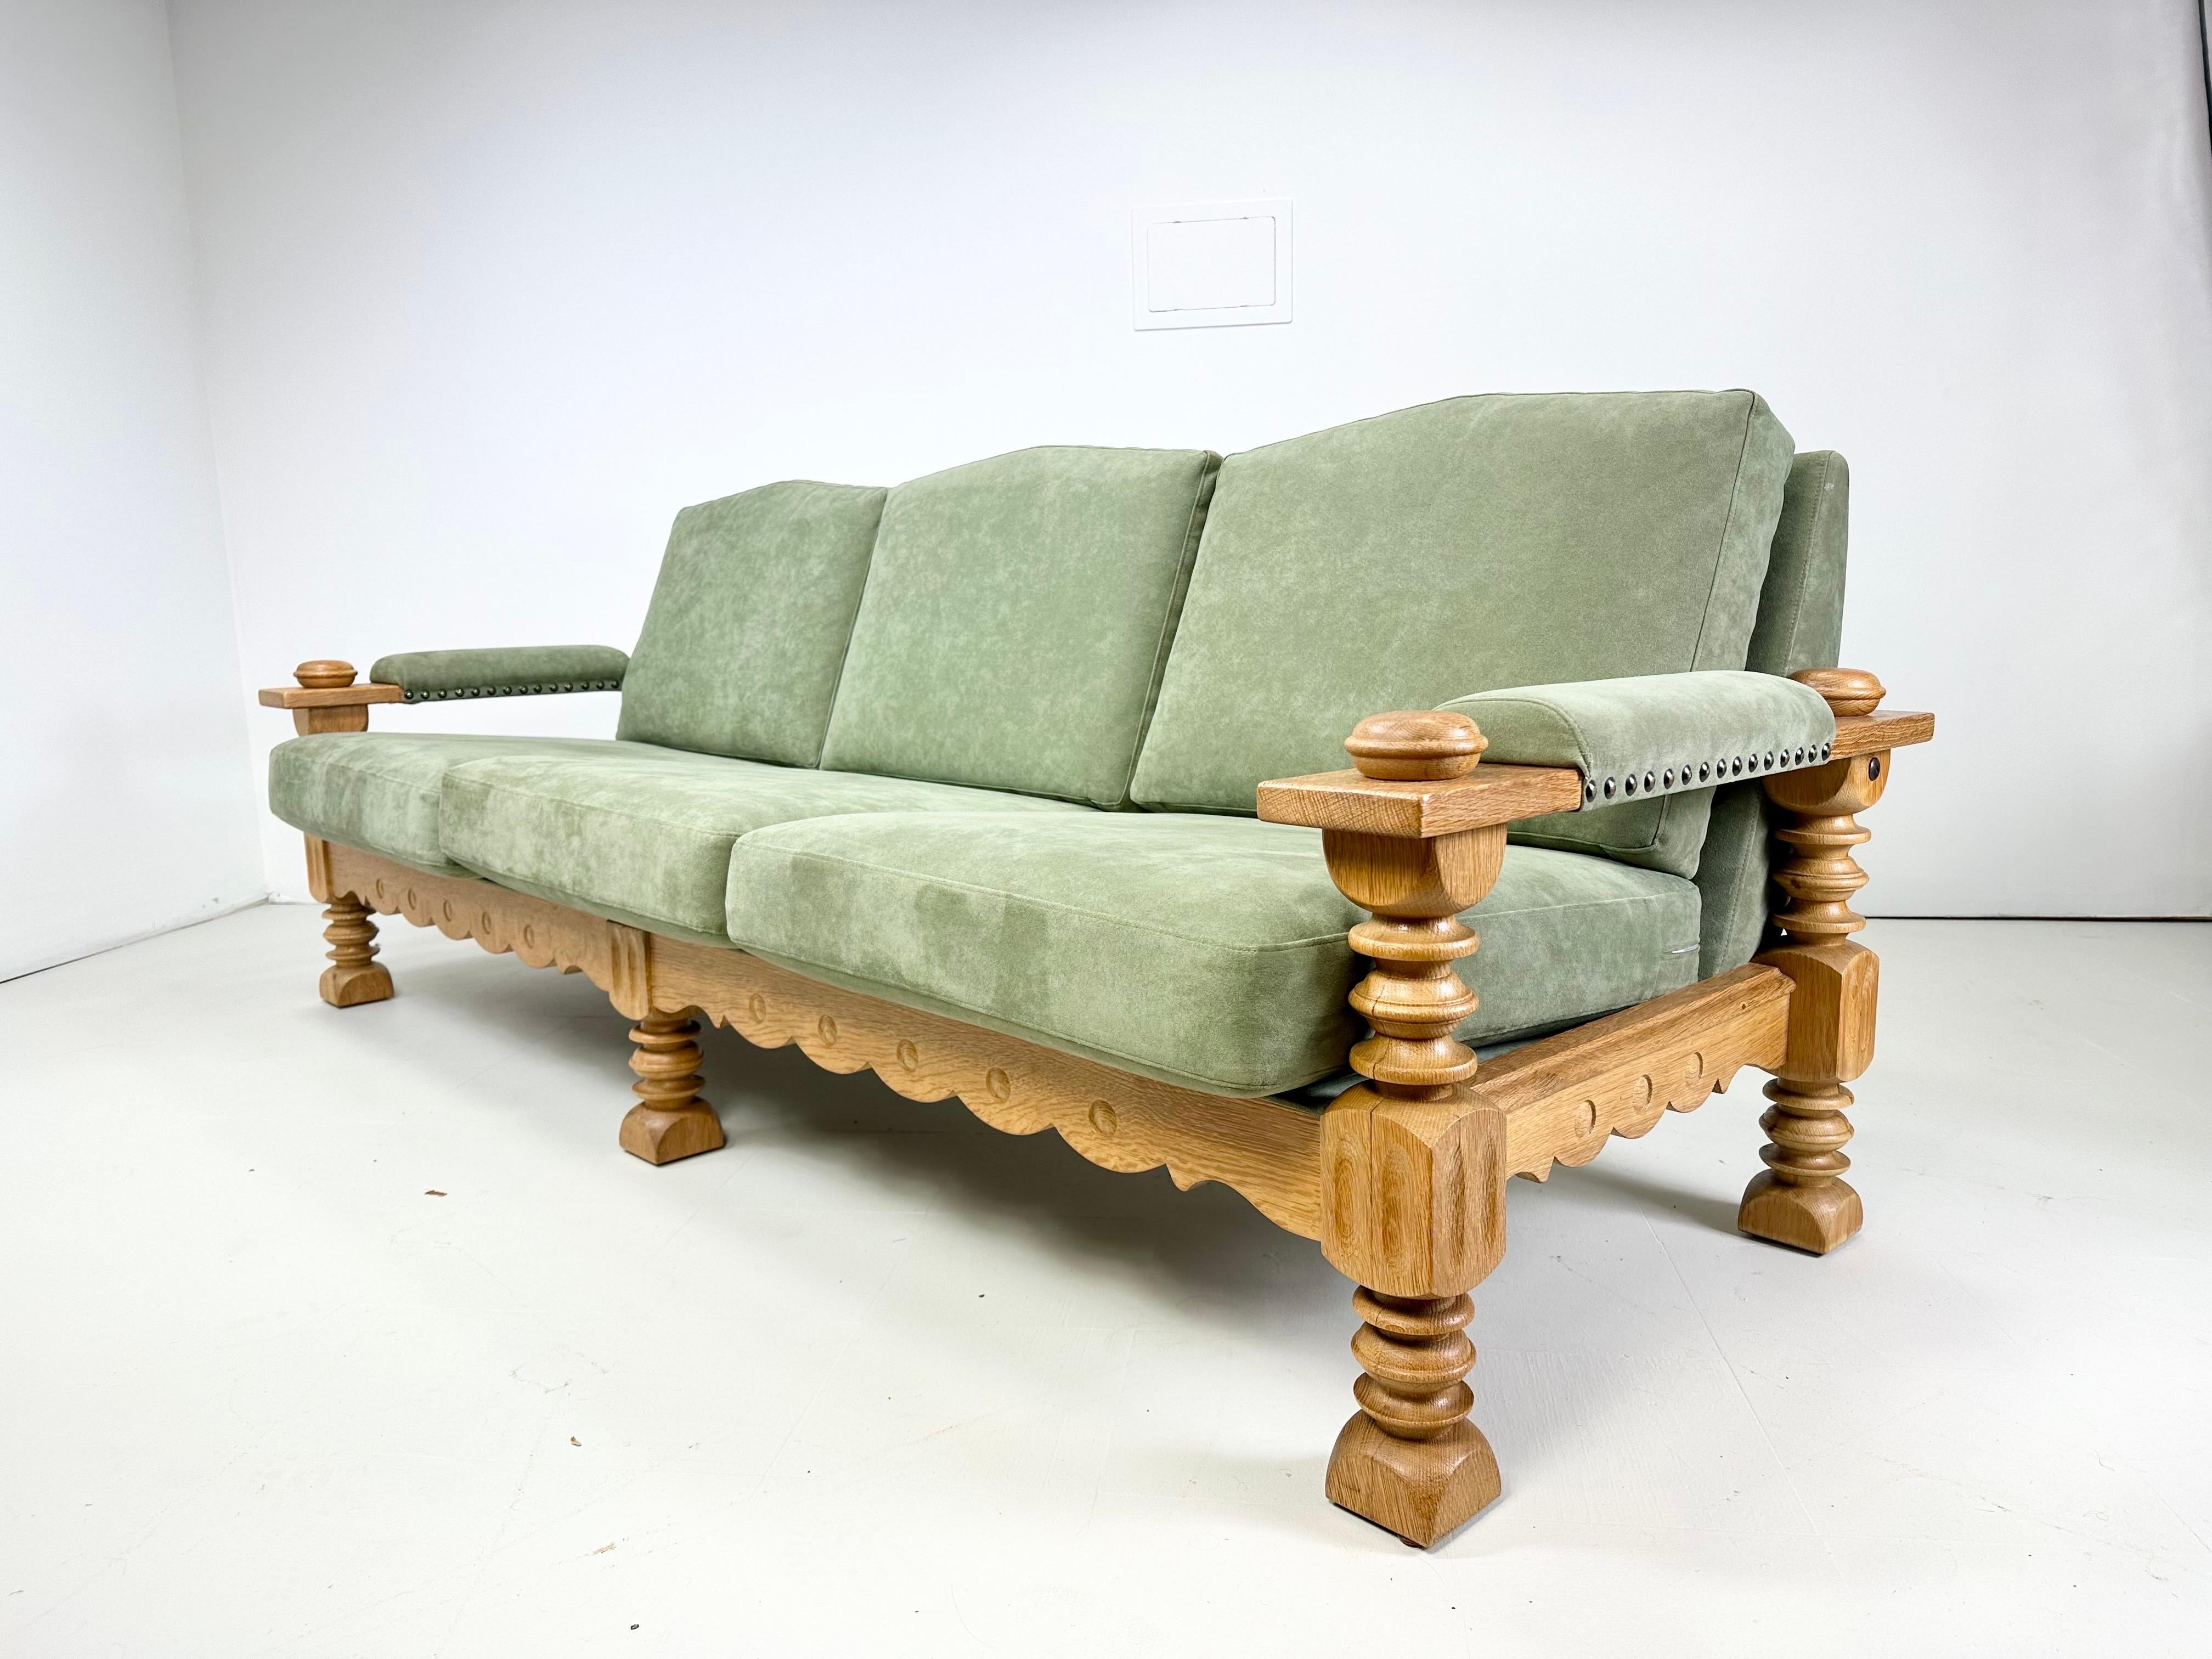 Danish Cabinet maker sofa. Carved oak frame. Nail head details. More recent micro suede upholstery. 1970’s, Denmark

Delivery to NYC Area $550. Please inquire.